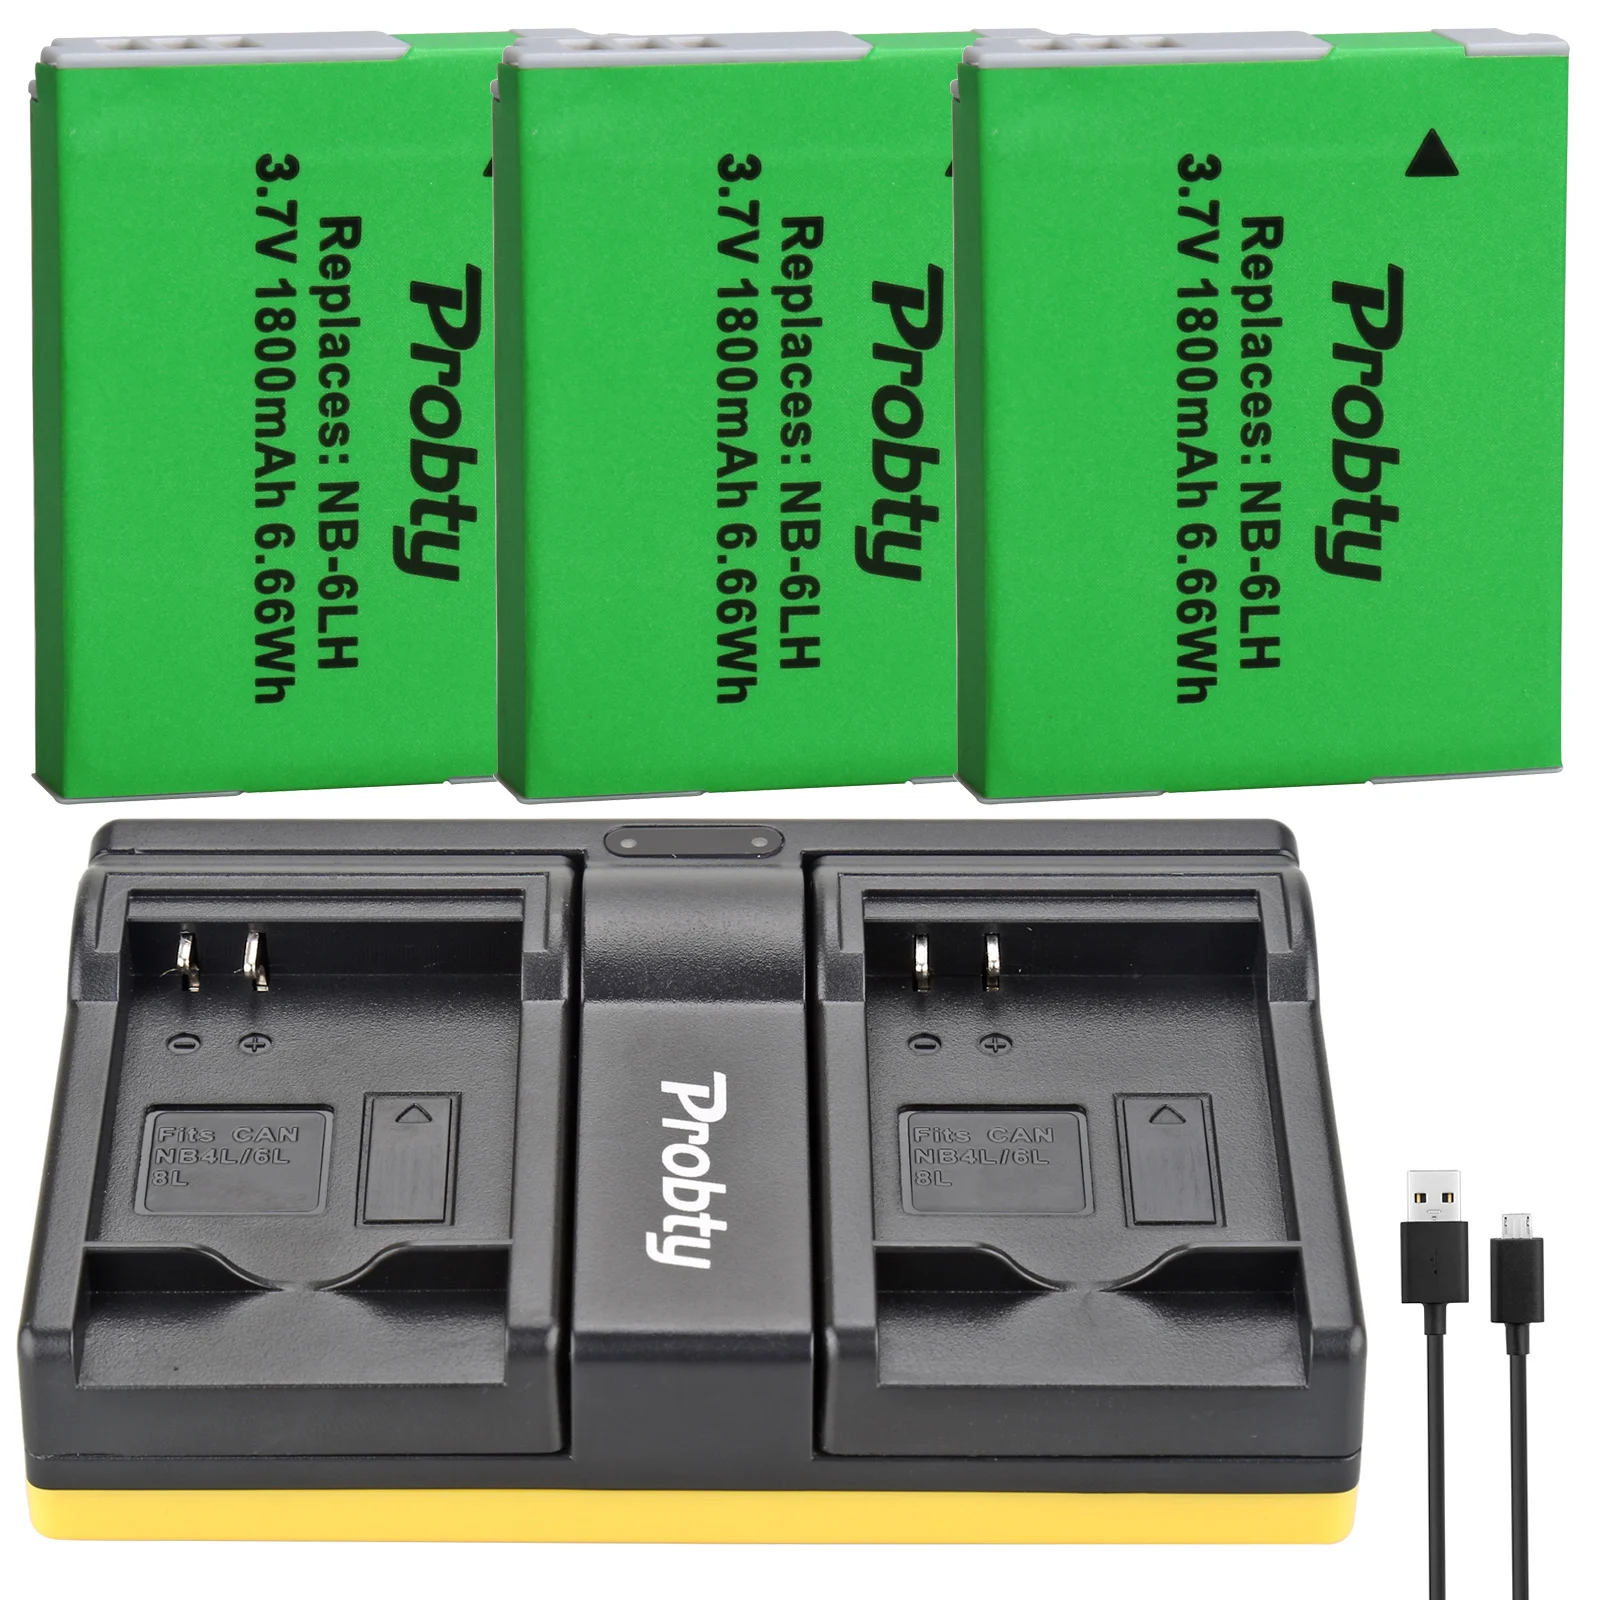 

NB-6L Battery-Charger For Canon IXUS 85 95 IS SD770 PowerShot D10 S90 EG SD980 D10 S90 S95 SD770 IS SD980 IS SD1200 IS